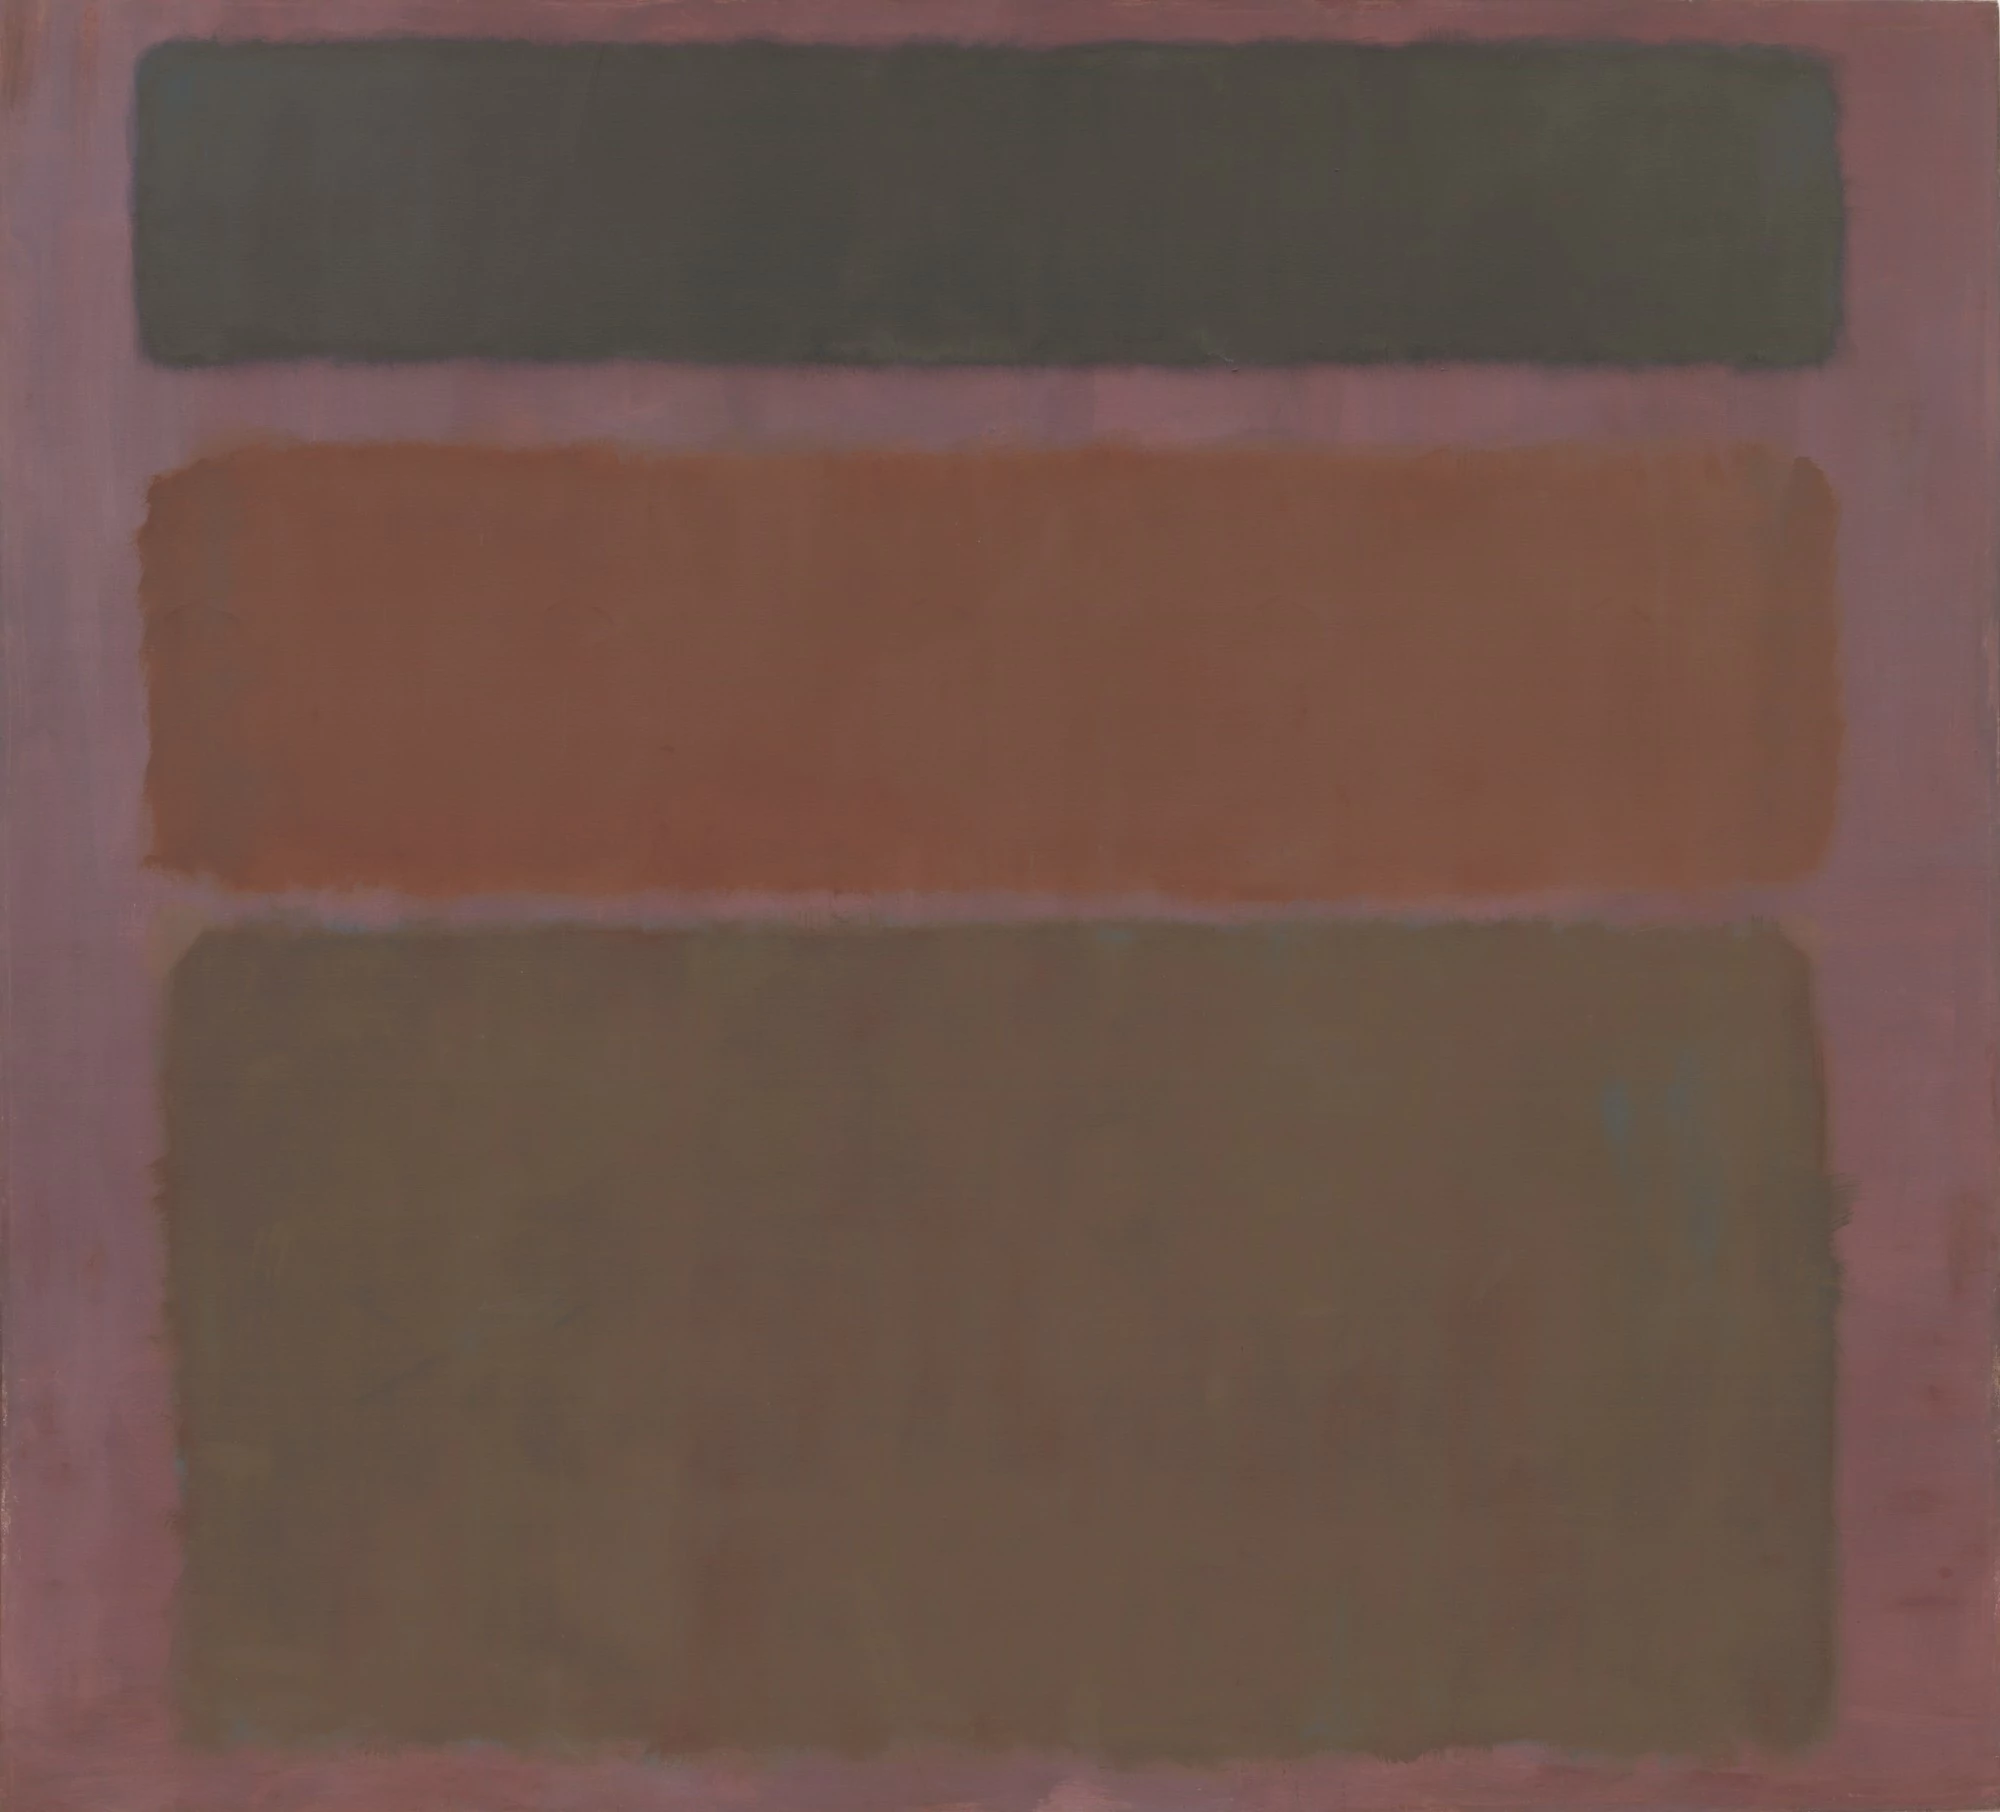 No. 16 (Red, Brown, and Black), Mark Rothko